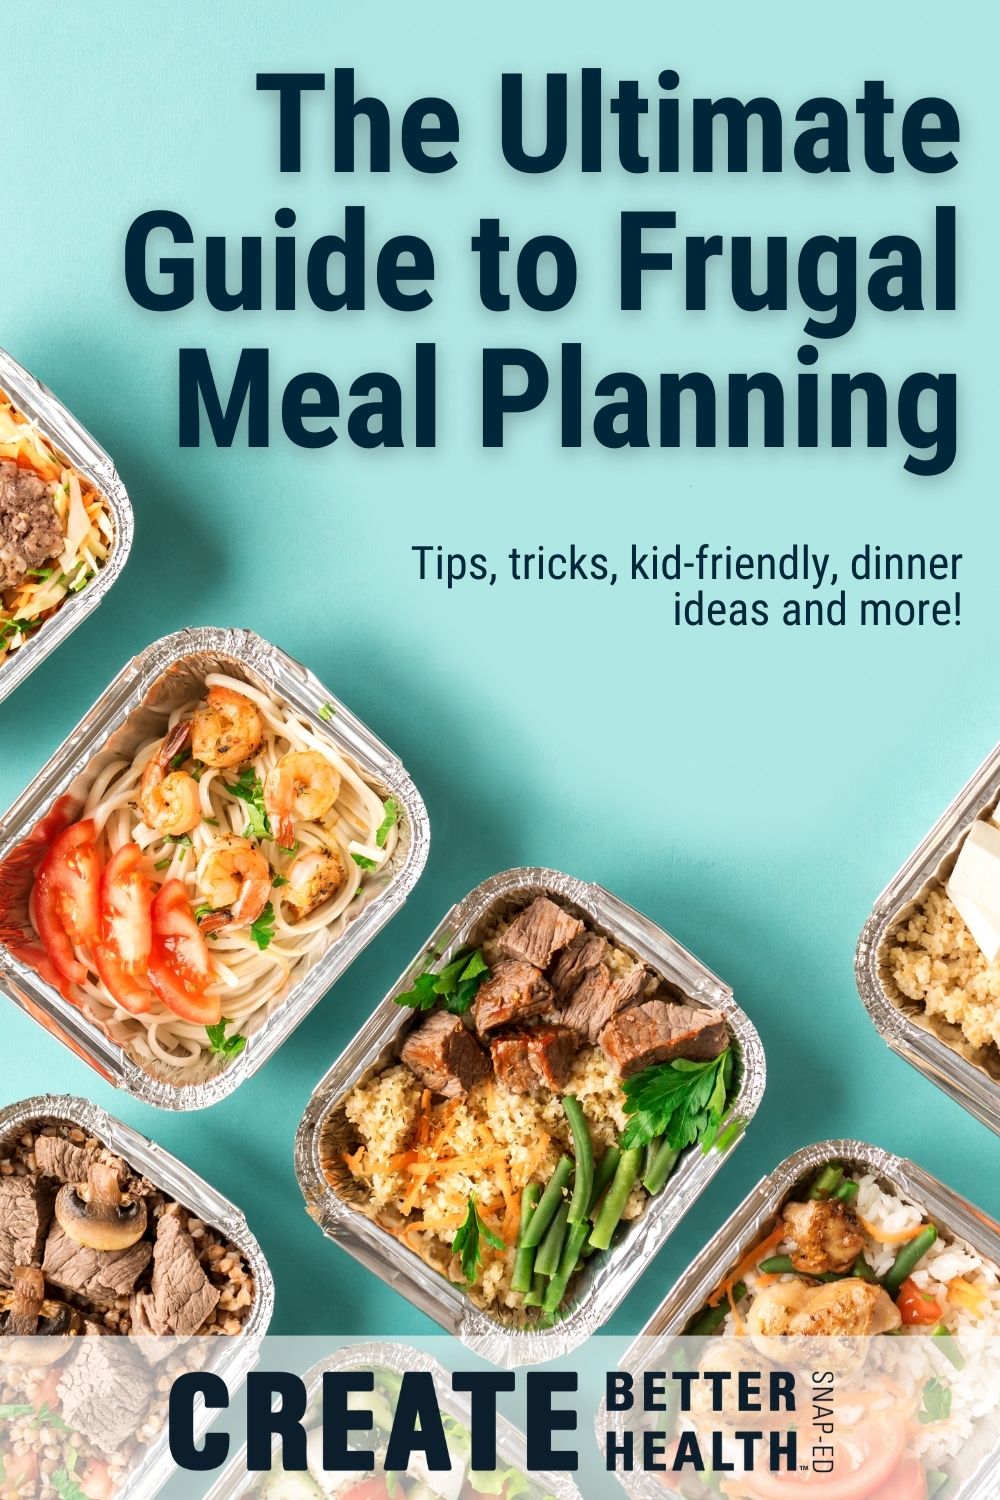 Frugal-friendly eating offers